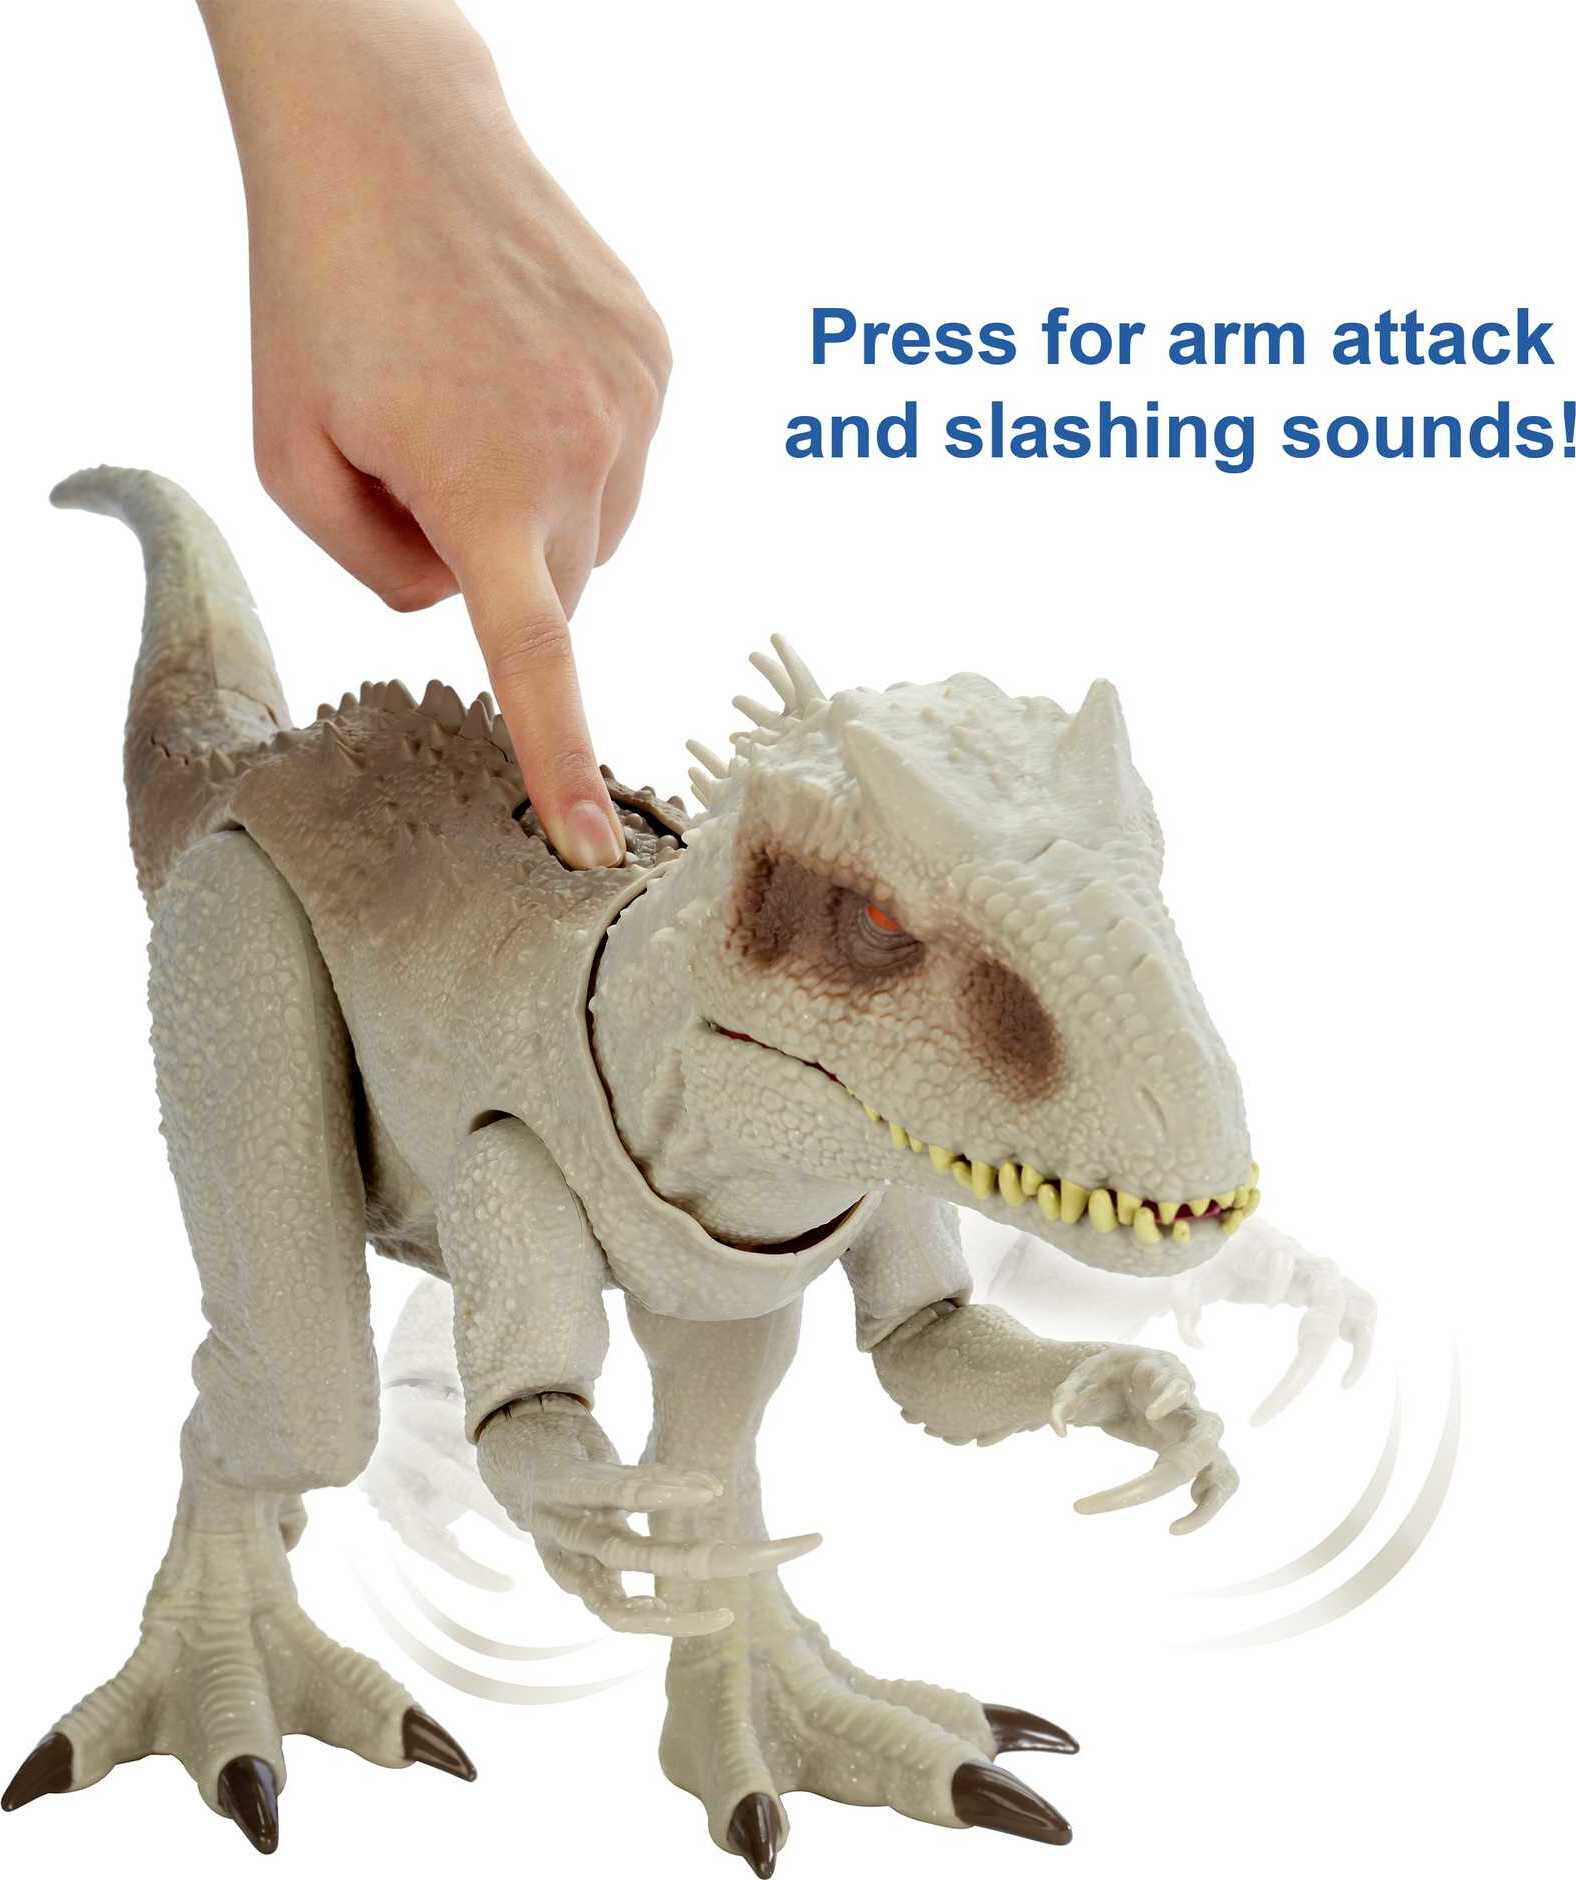 Jurassic World Destroy ‘N Devour Indominus Rex Dinosaur Action Figure with Motion, Sound and Eating Feature, Toy Gift - image 4 of 8